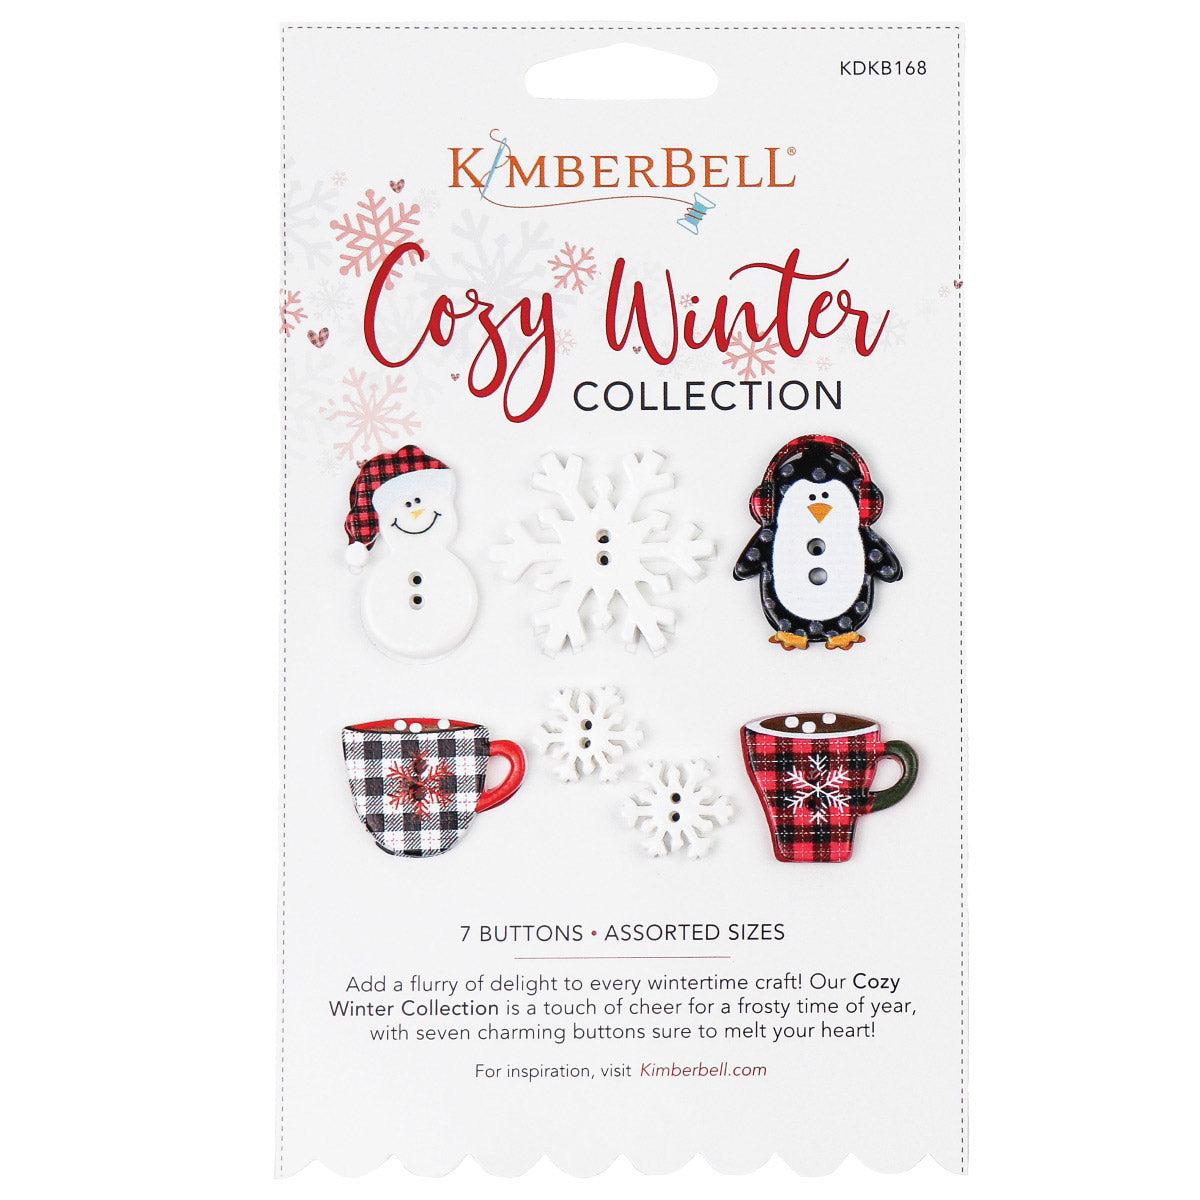 Add a flurry of delight to every wintertime craft with Cozy Winter Buttons (KDKB168) by Kimberbell! The buttons include 3 snowflakes in 2 sizes, 2 mugs, a penguin, and a snowman.